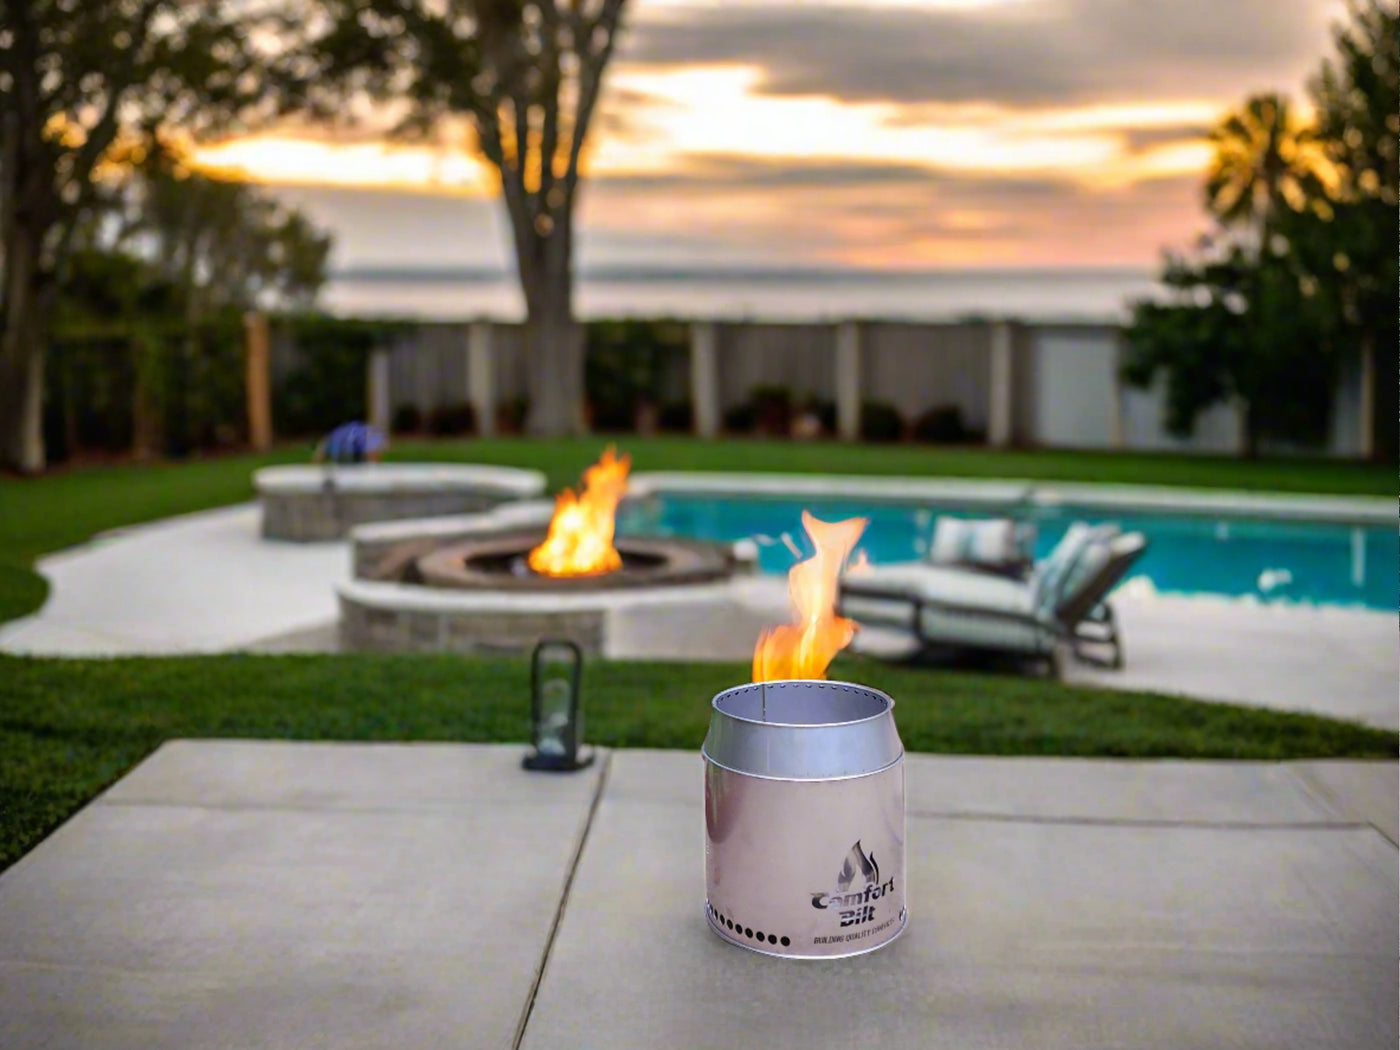 Comfortbilt Portable Outdoor Stainless Steel Smokeless Fire Pit great for entertaining.